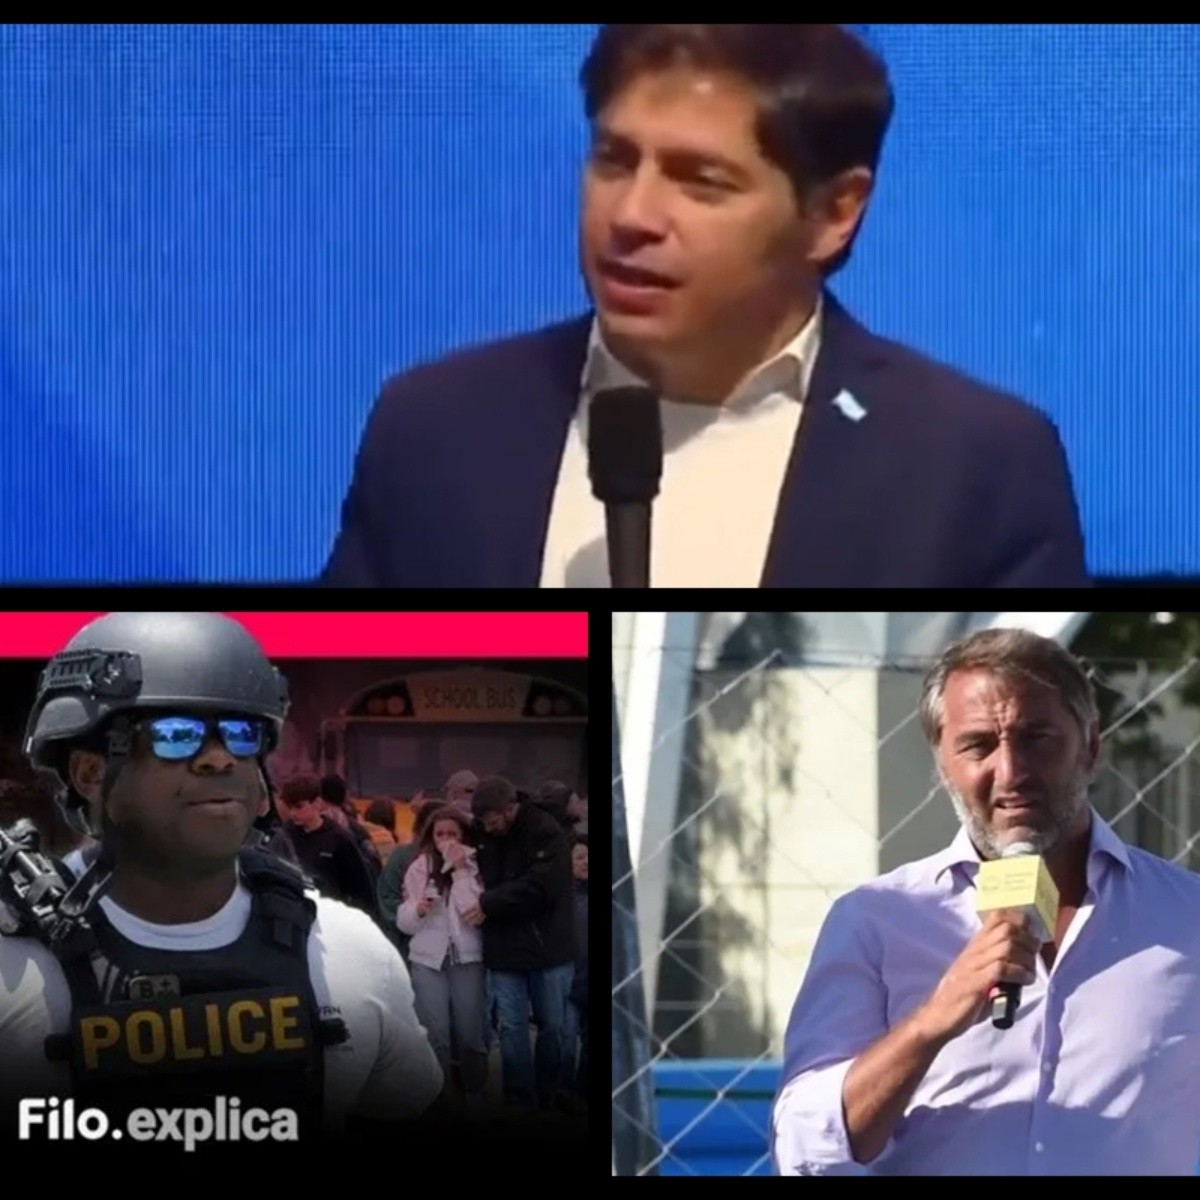 Kicillof defended inclusive language and called on young people to